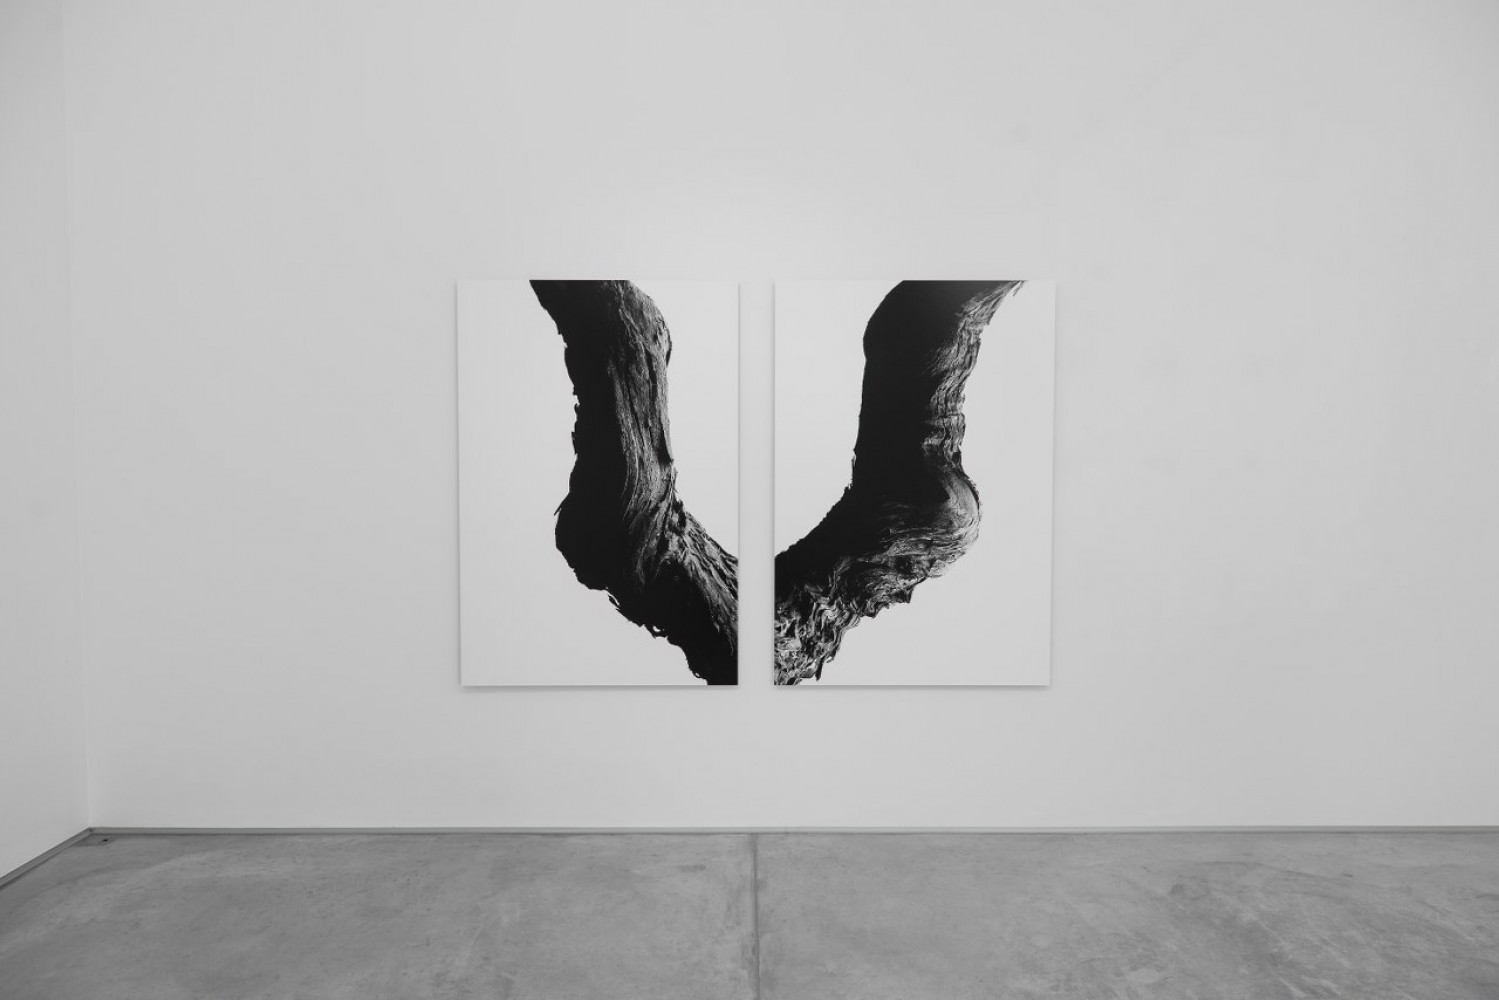 Marco D'Anna, ‘OLTRE/N.10 (diptych)’, 2016, Fine Art Print on Paper Museo Silver Rag, 300 g/r, mounted on Dibond, ed. 1/5